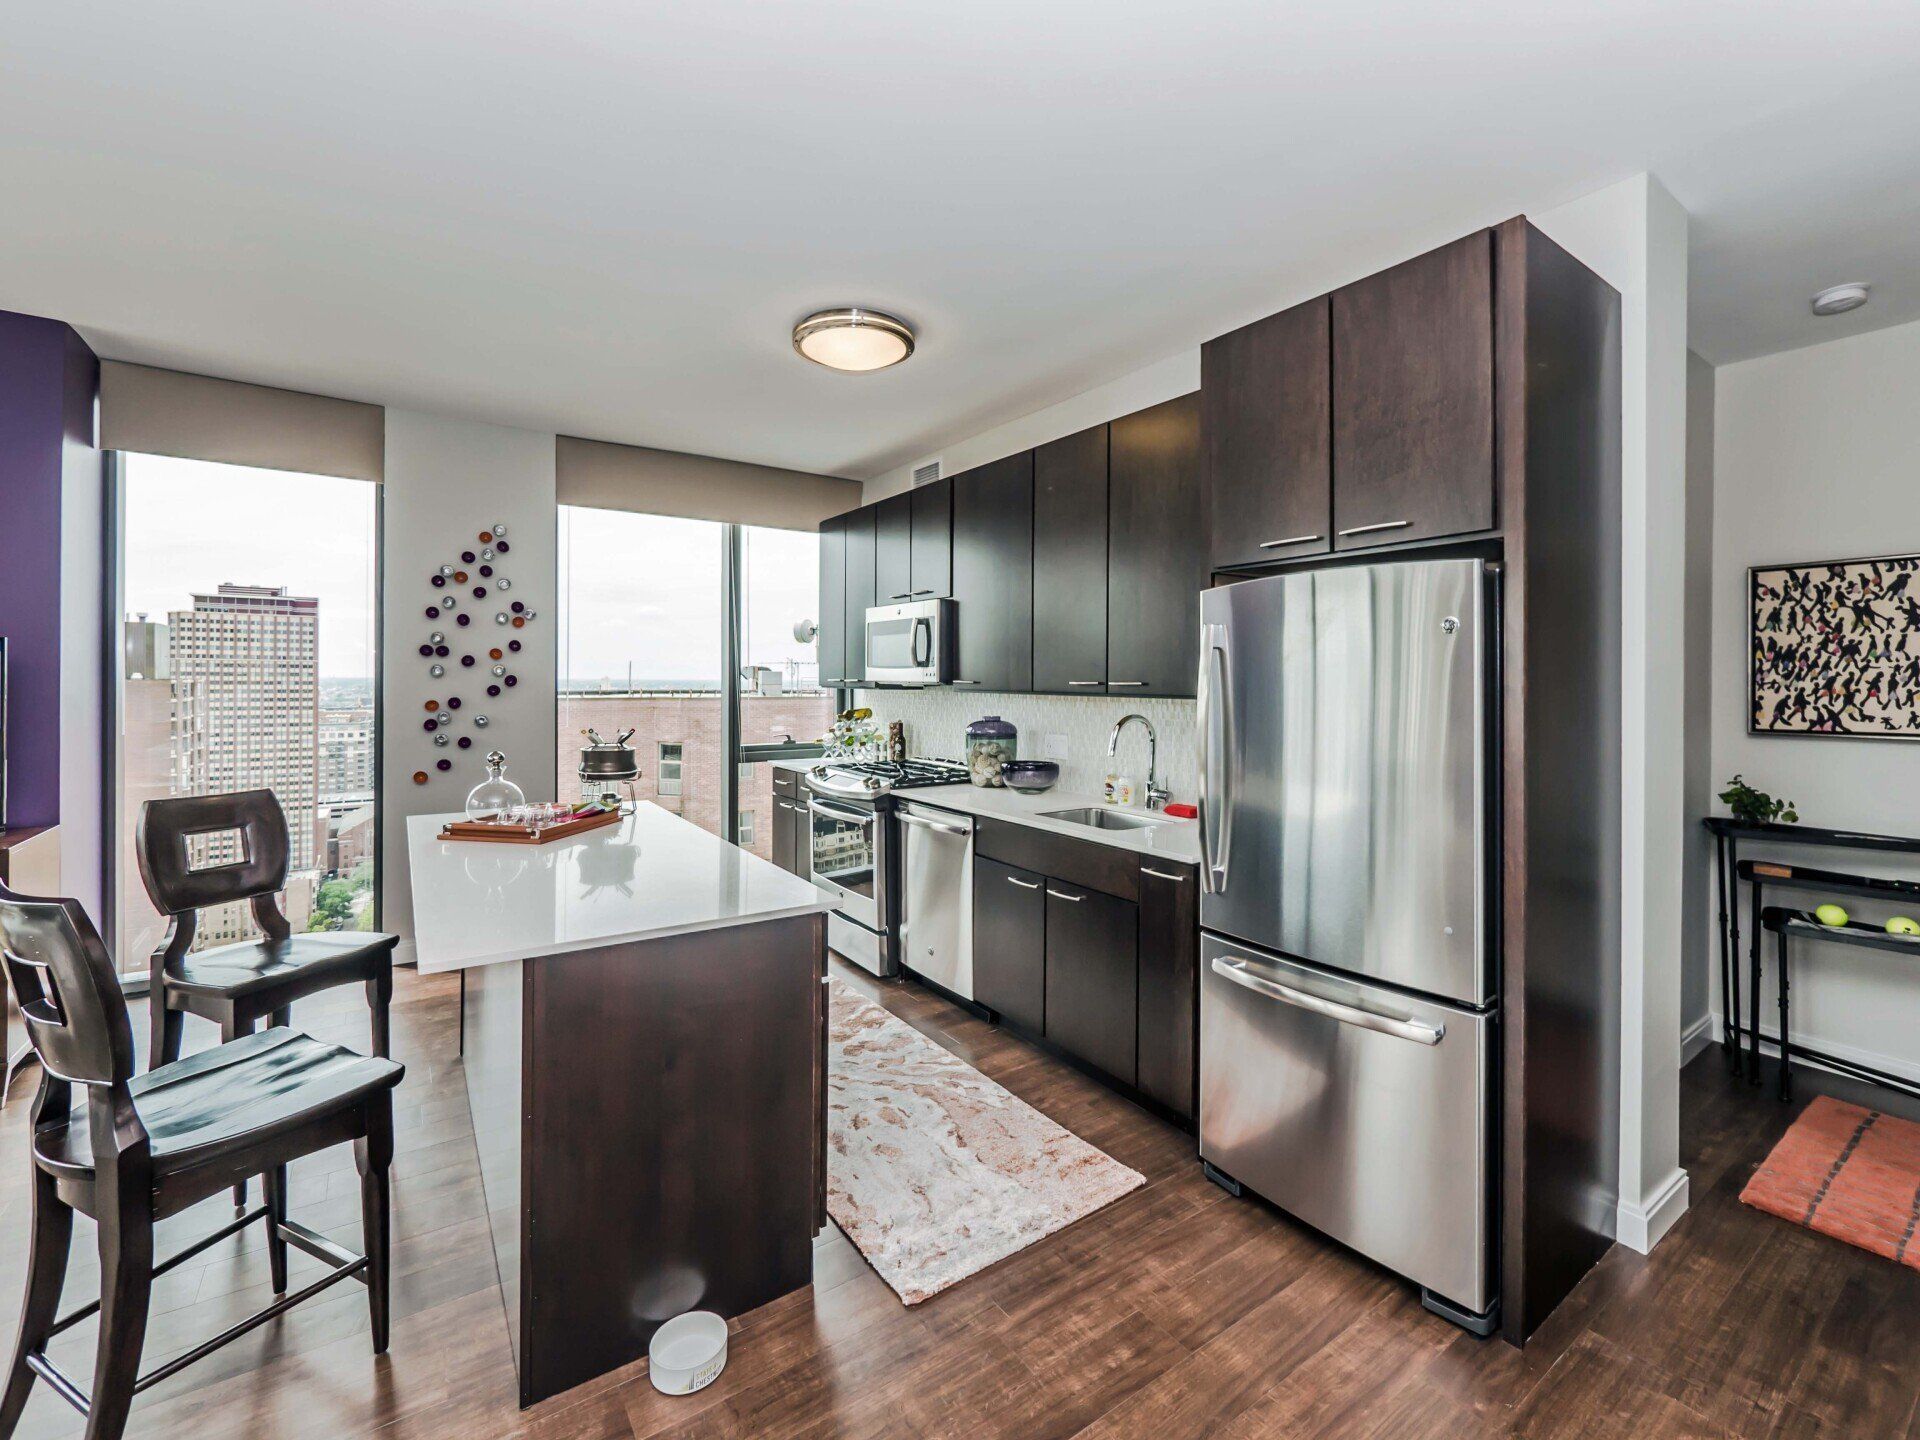 A kitchen with stainless steel appliances and wooden cabinets at State & Chestnut.